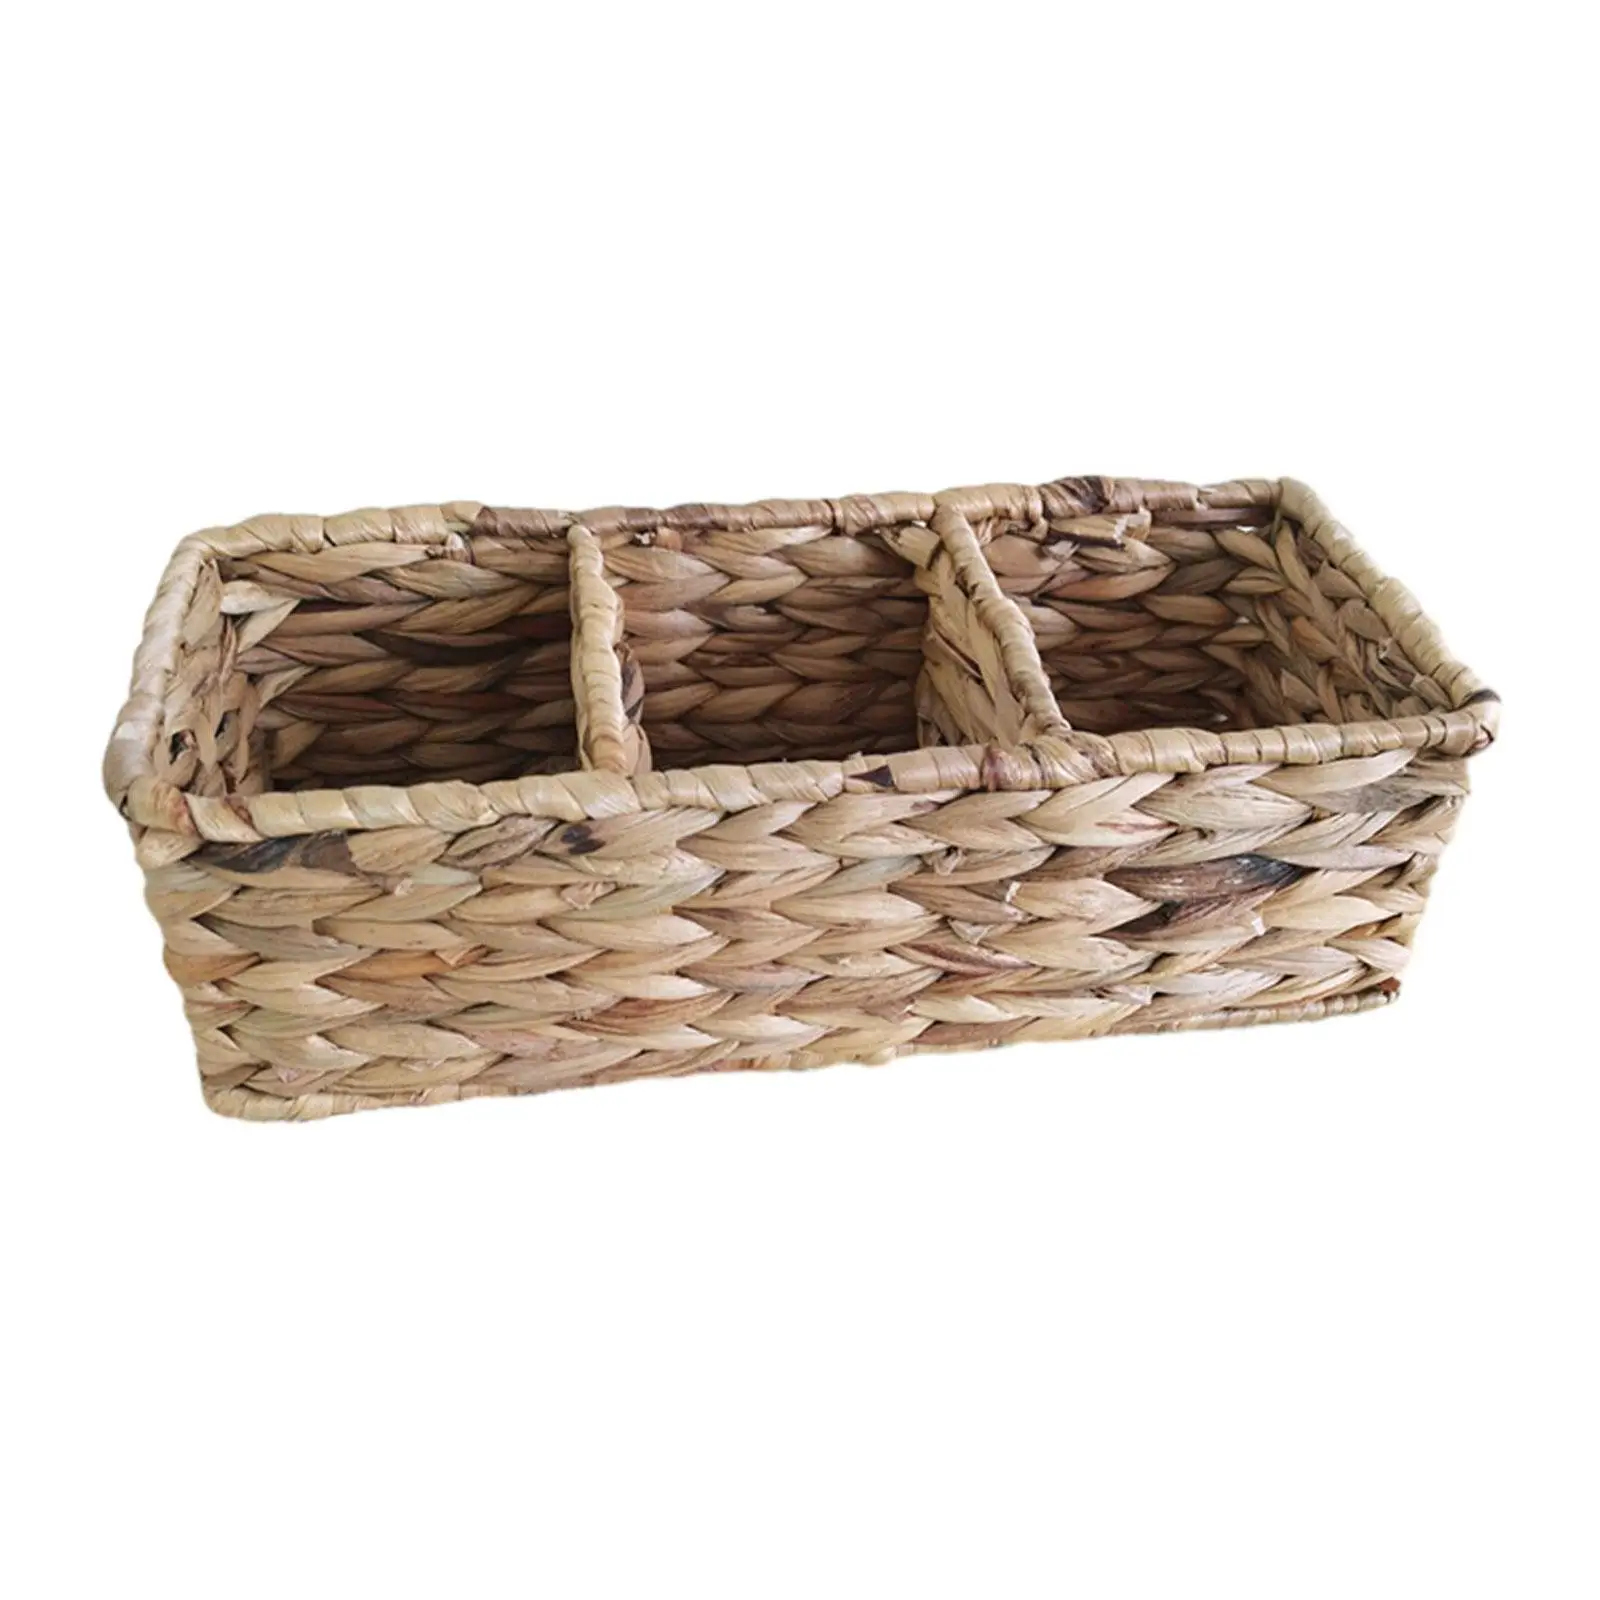 Woven Basket with Compartments Portable Countertop Desktop Lightweight Sundries Basket for Home Farmhouse Cafe Hotel Home Decor